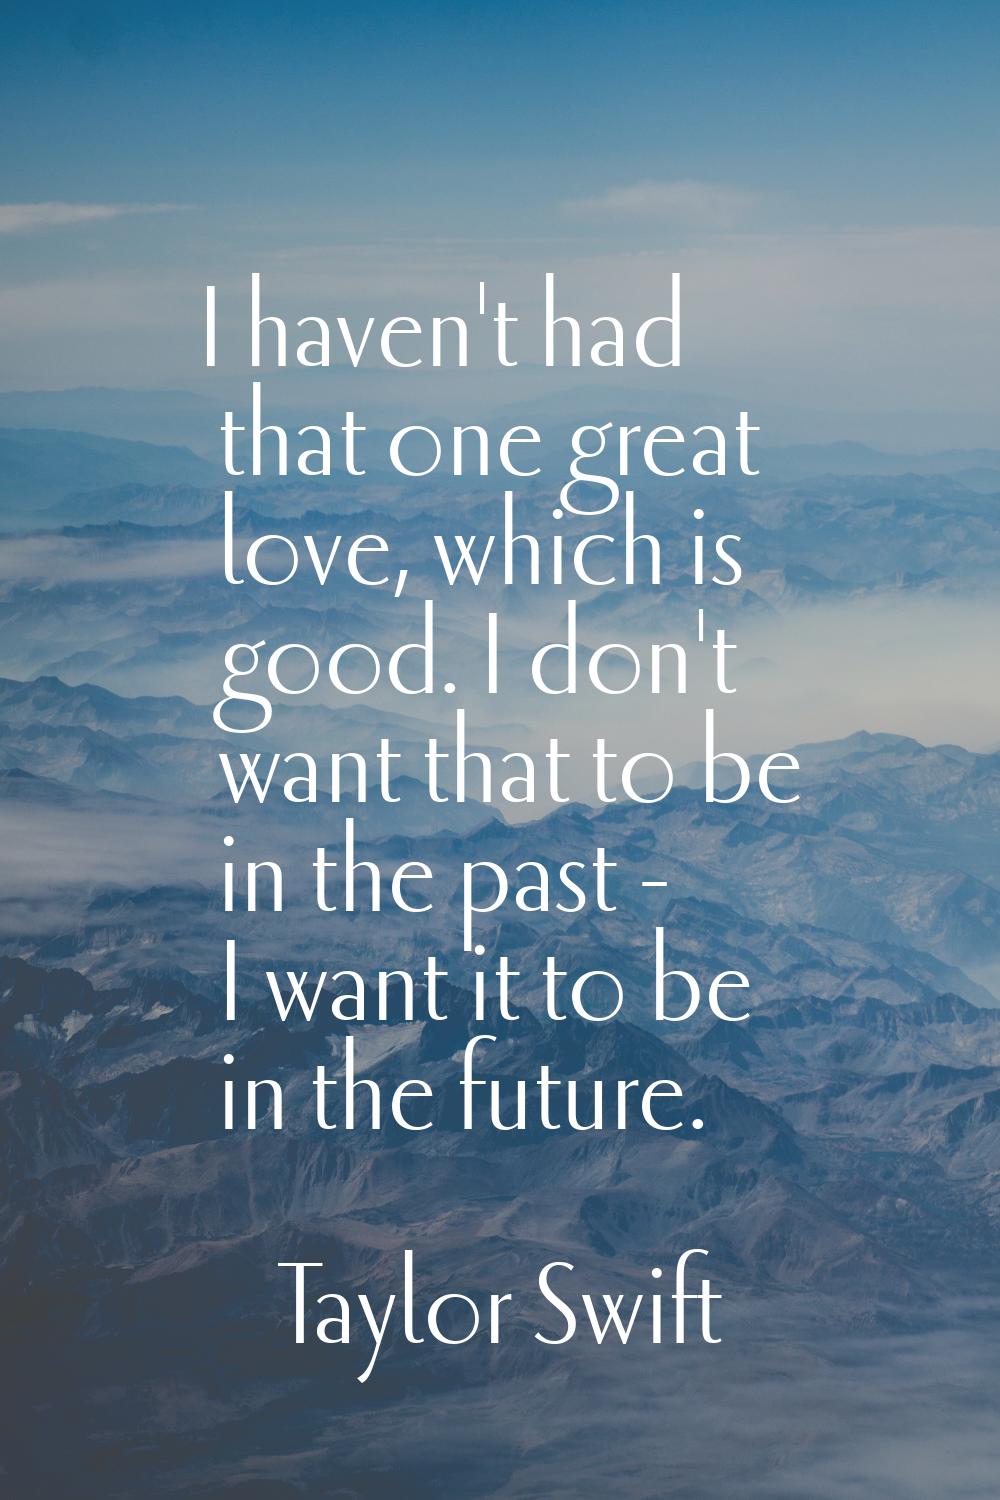 I haven't had that one great love, which is good. I don't want that to be in the past - I want it t